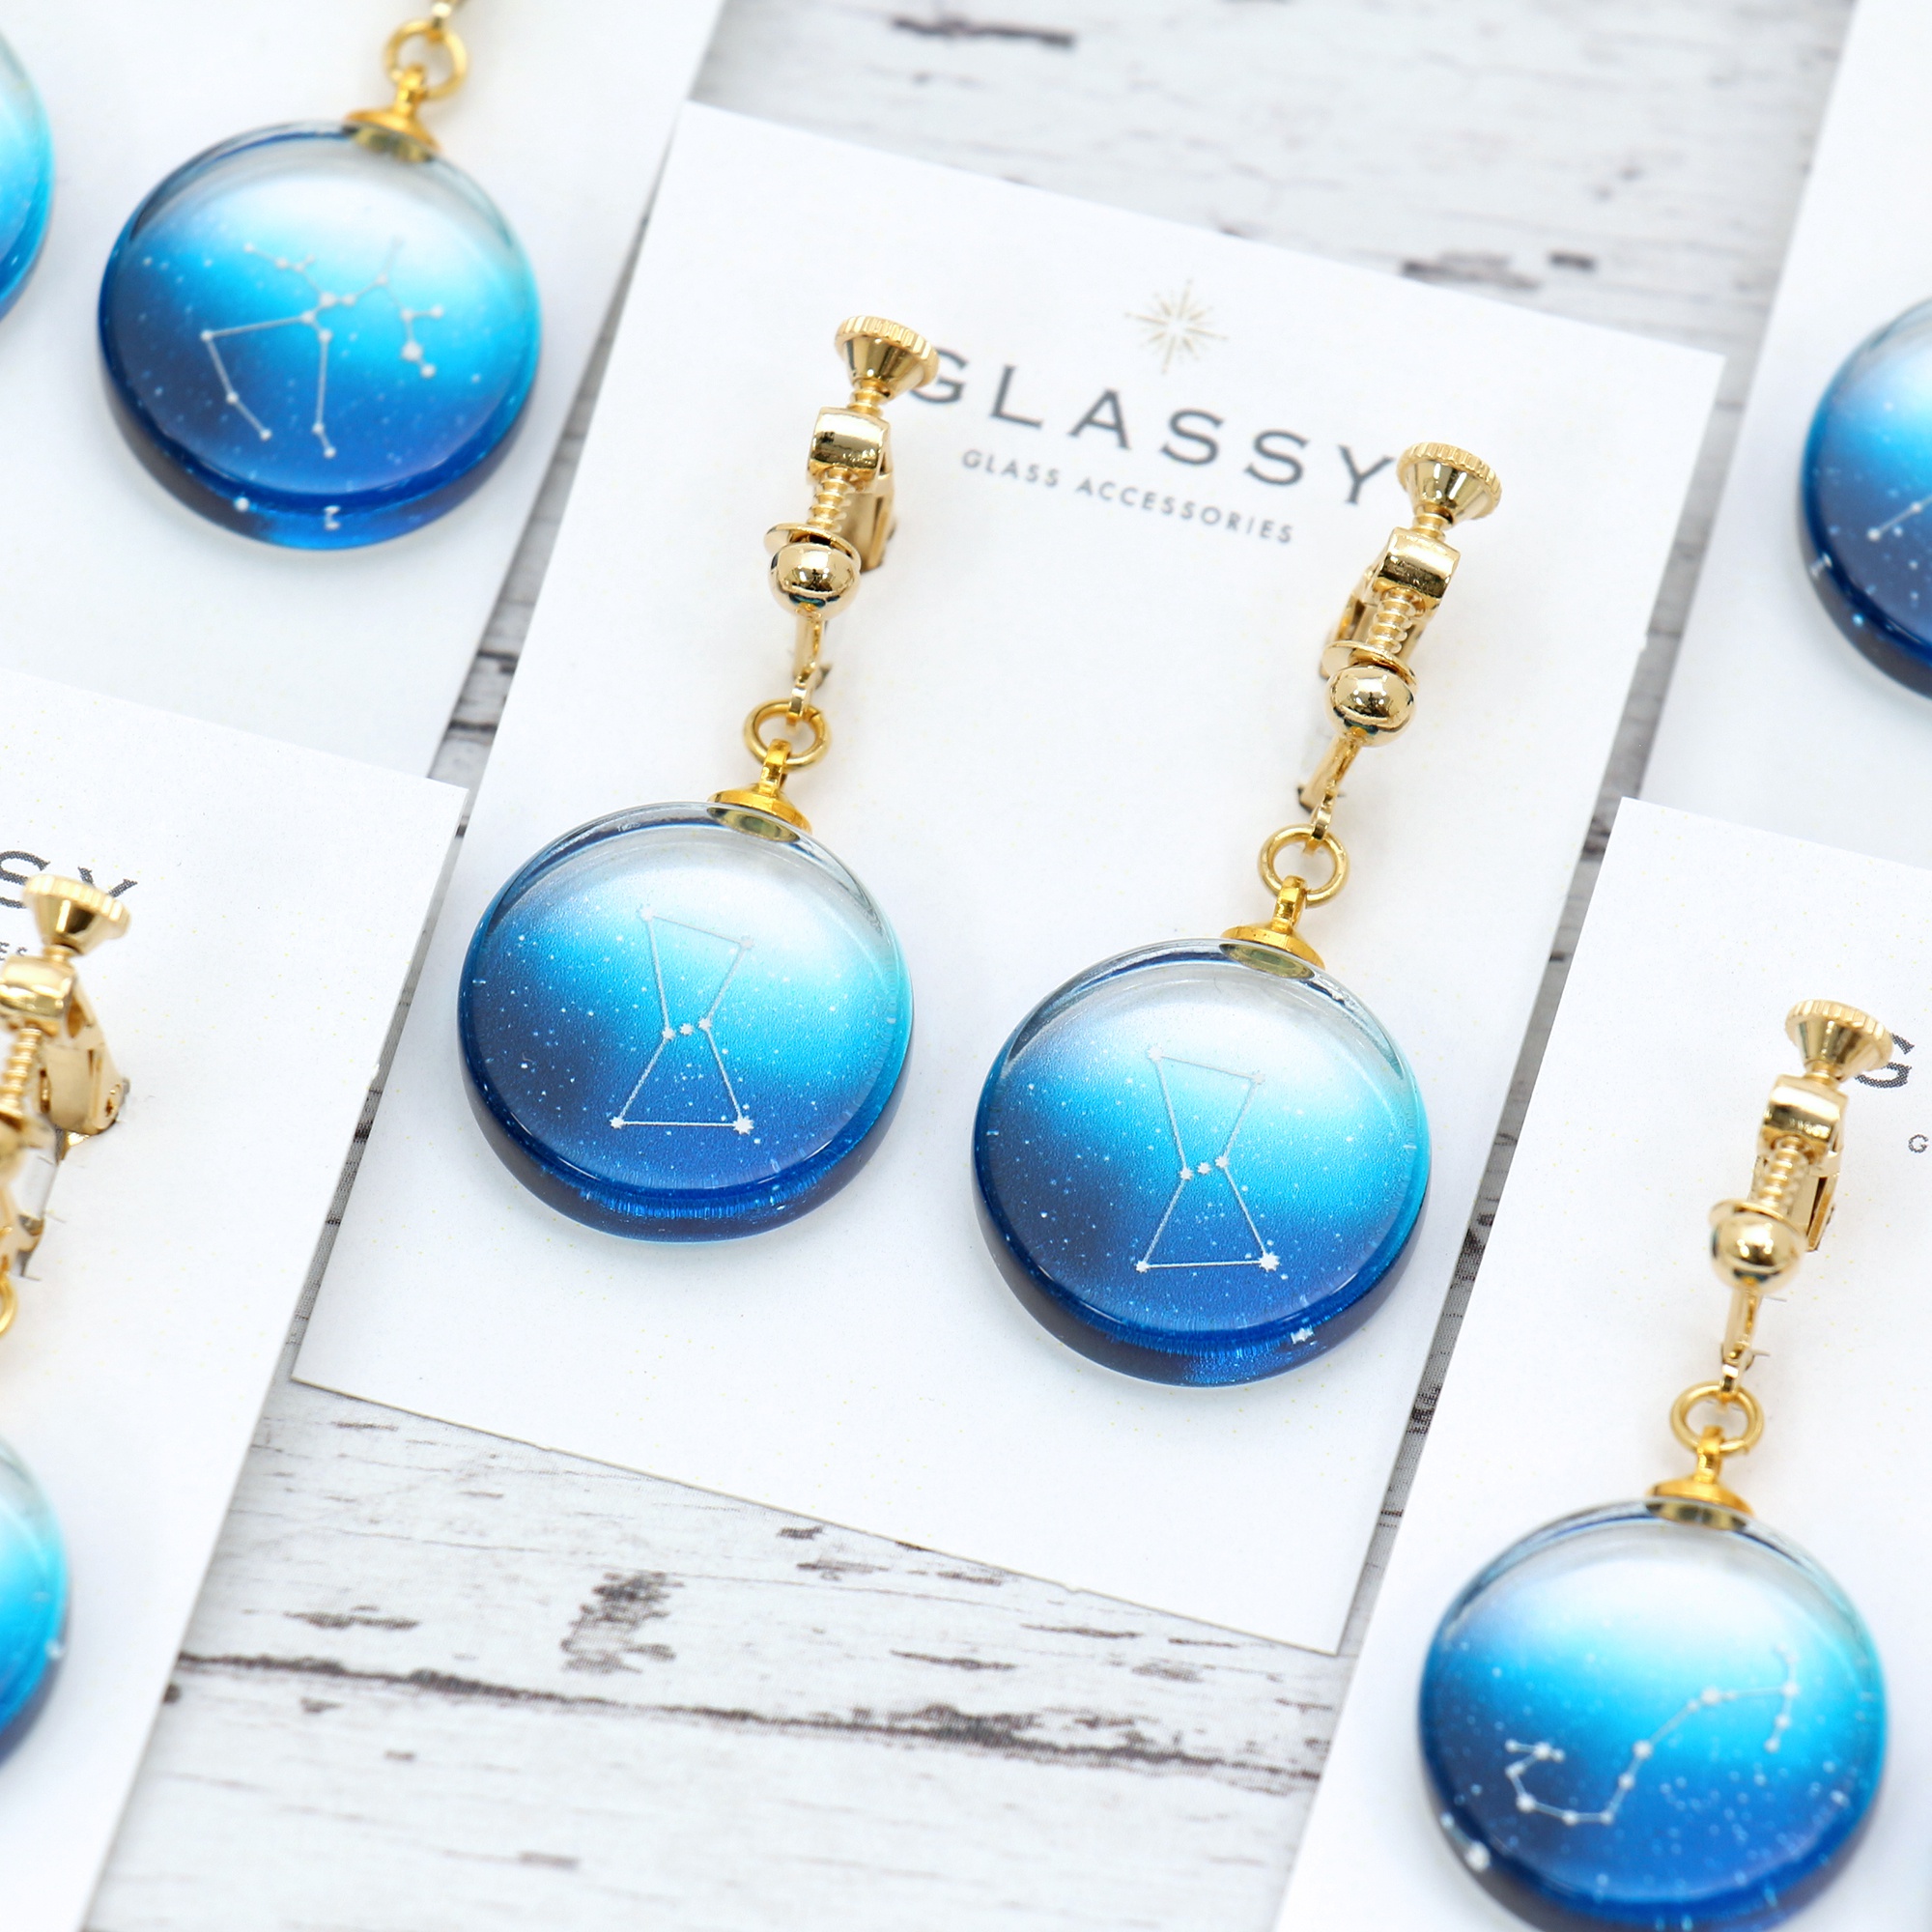 Glass accessories Earring CONSTELLATION Pisces round shape